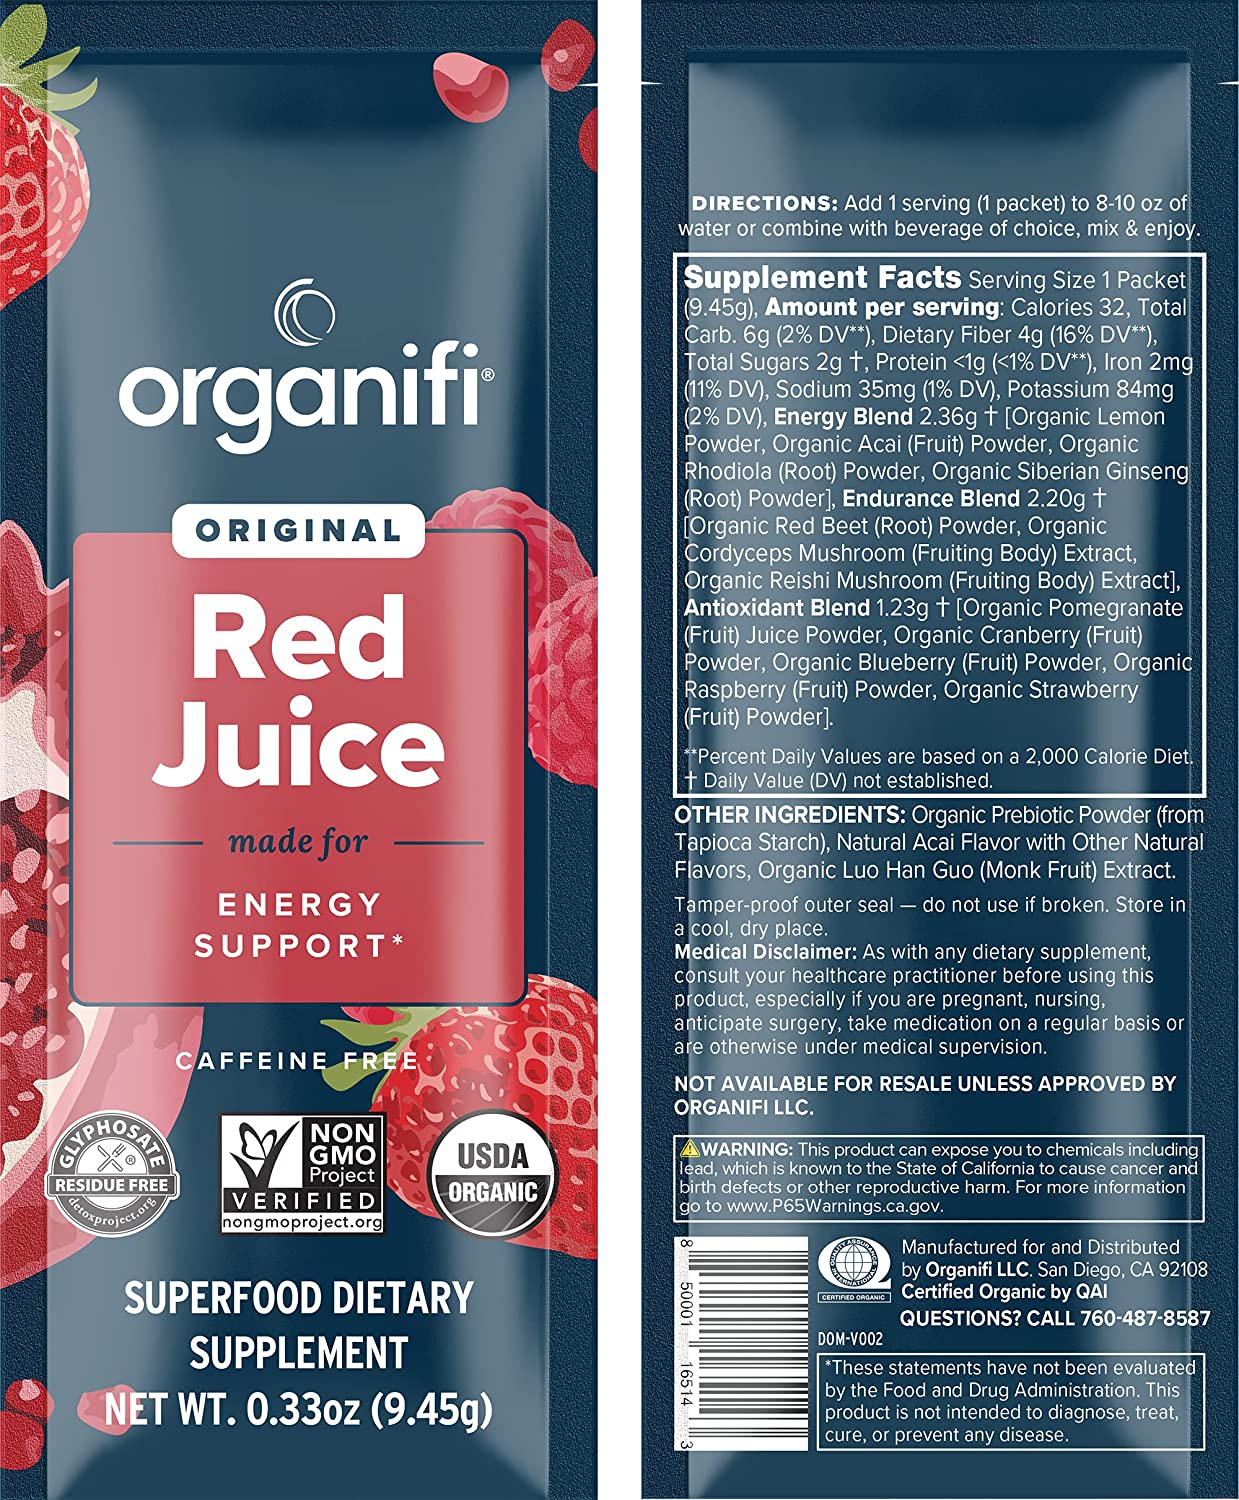 the front and back side of an Organifi Red Juice packet